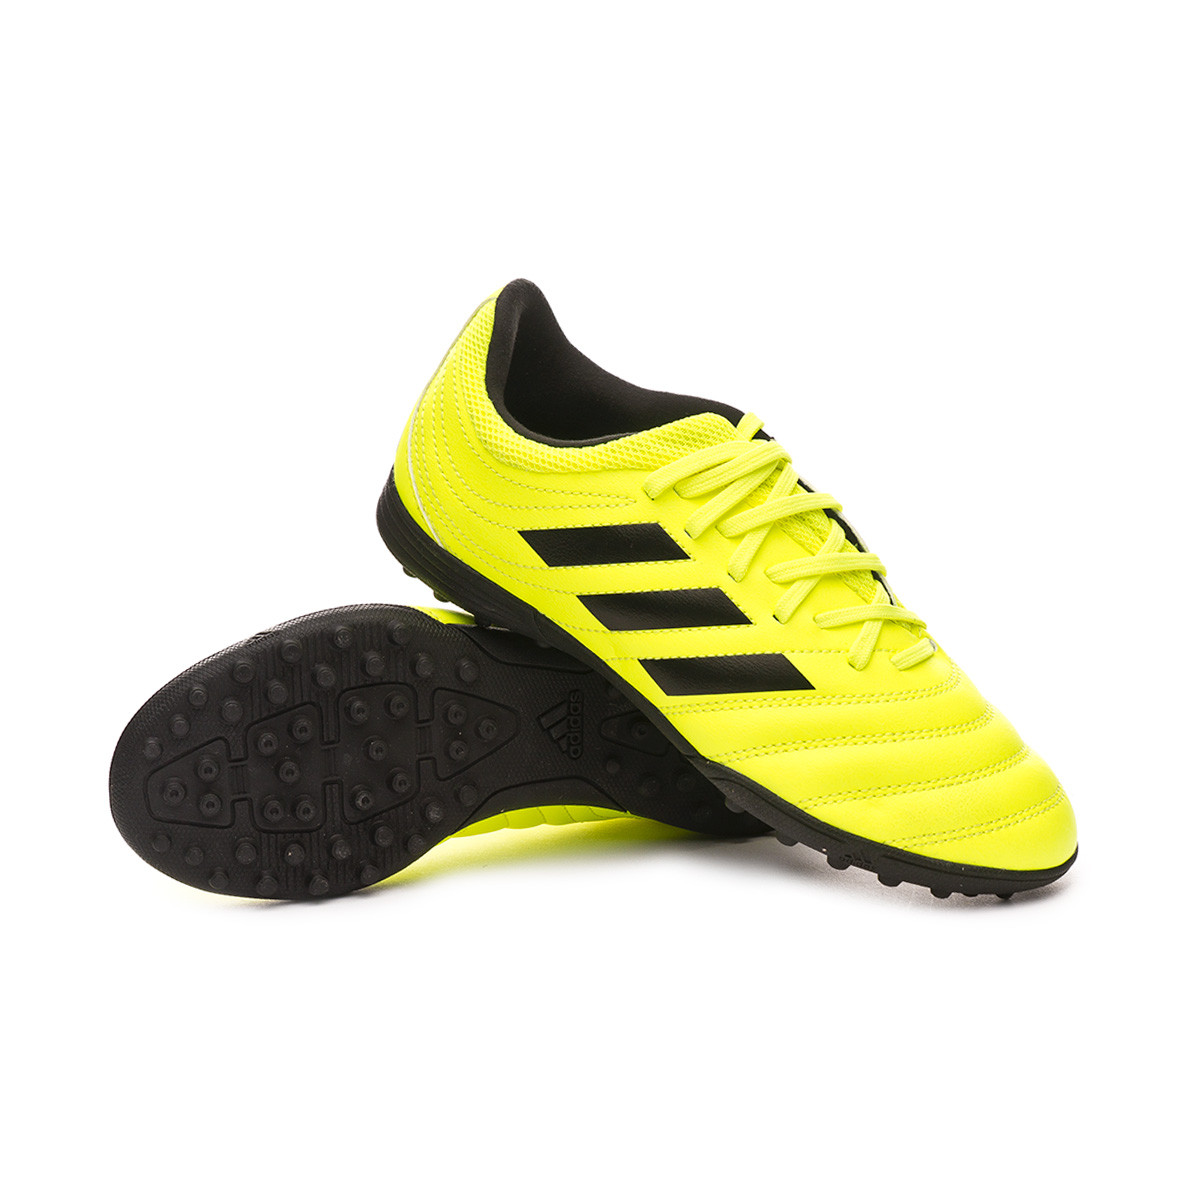 Adidas Copa 19.3 Turf Boots Online Sale, TO 50% OFF